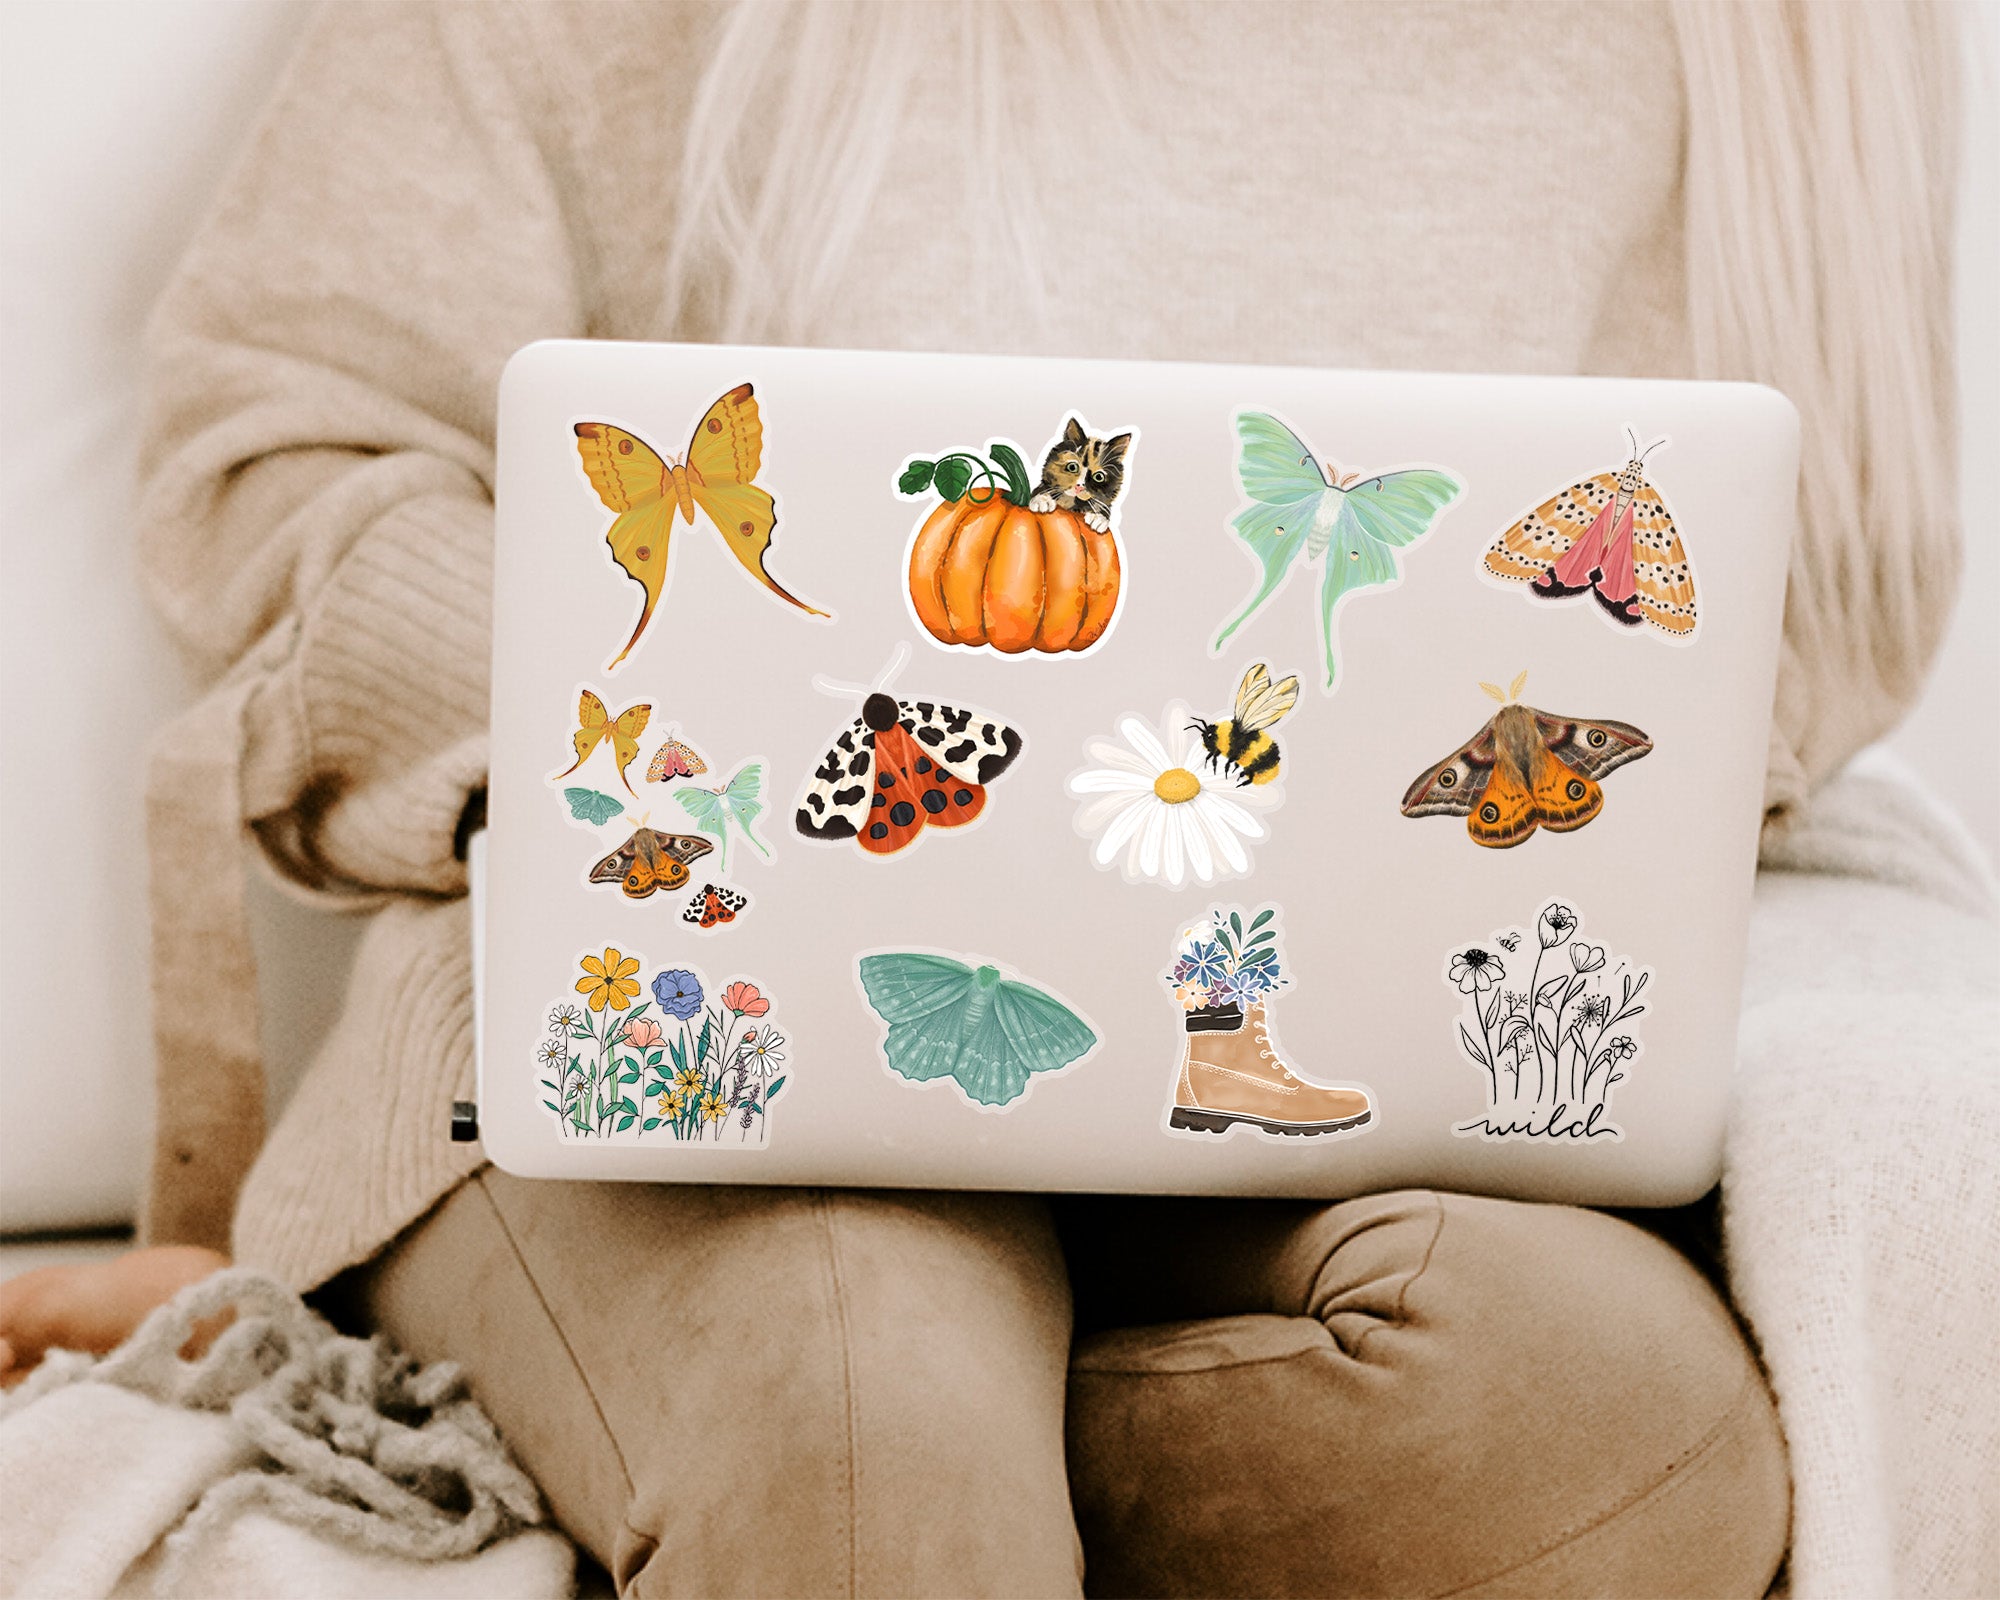 Nature and floral themed stickers decorating a laptop lid